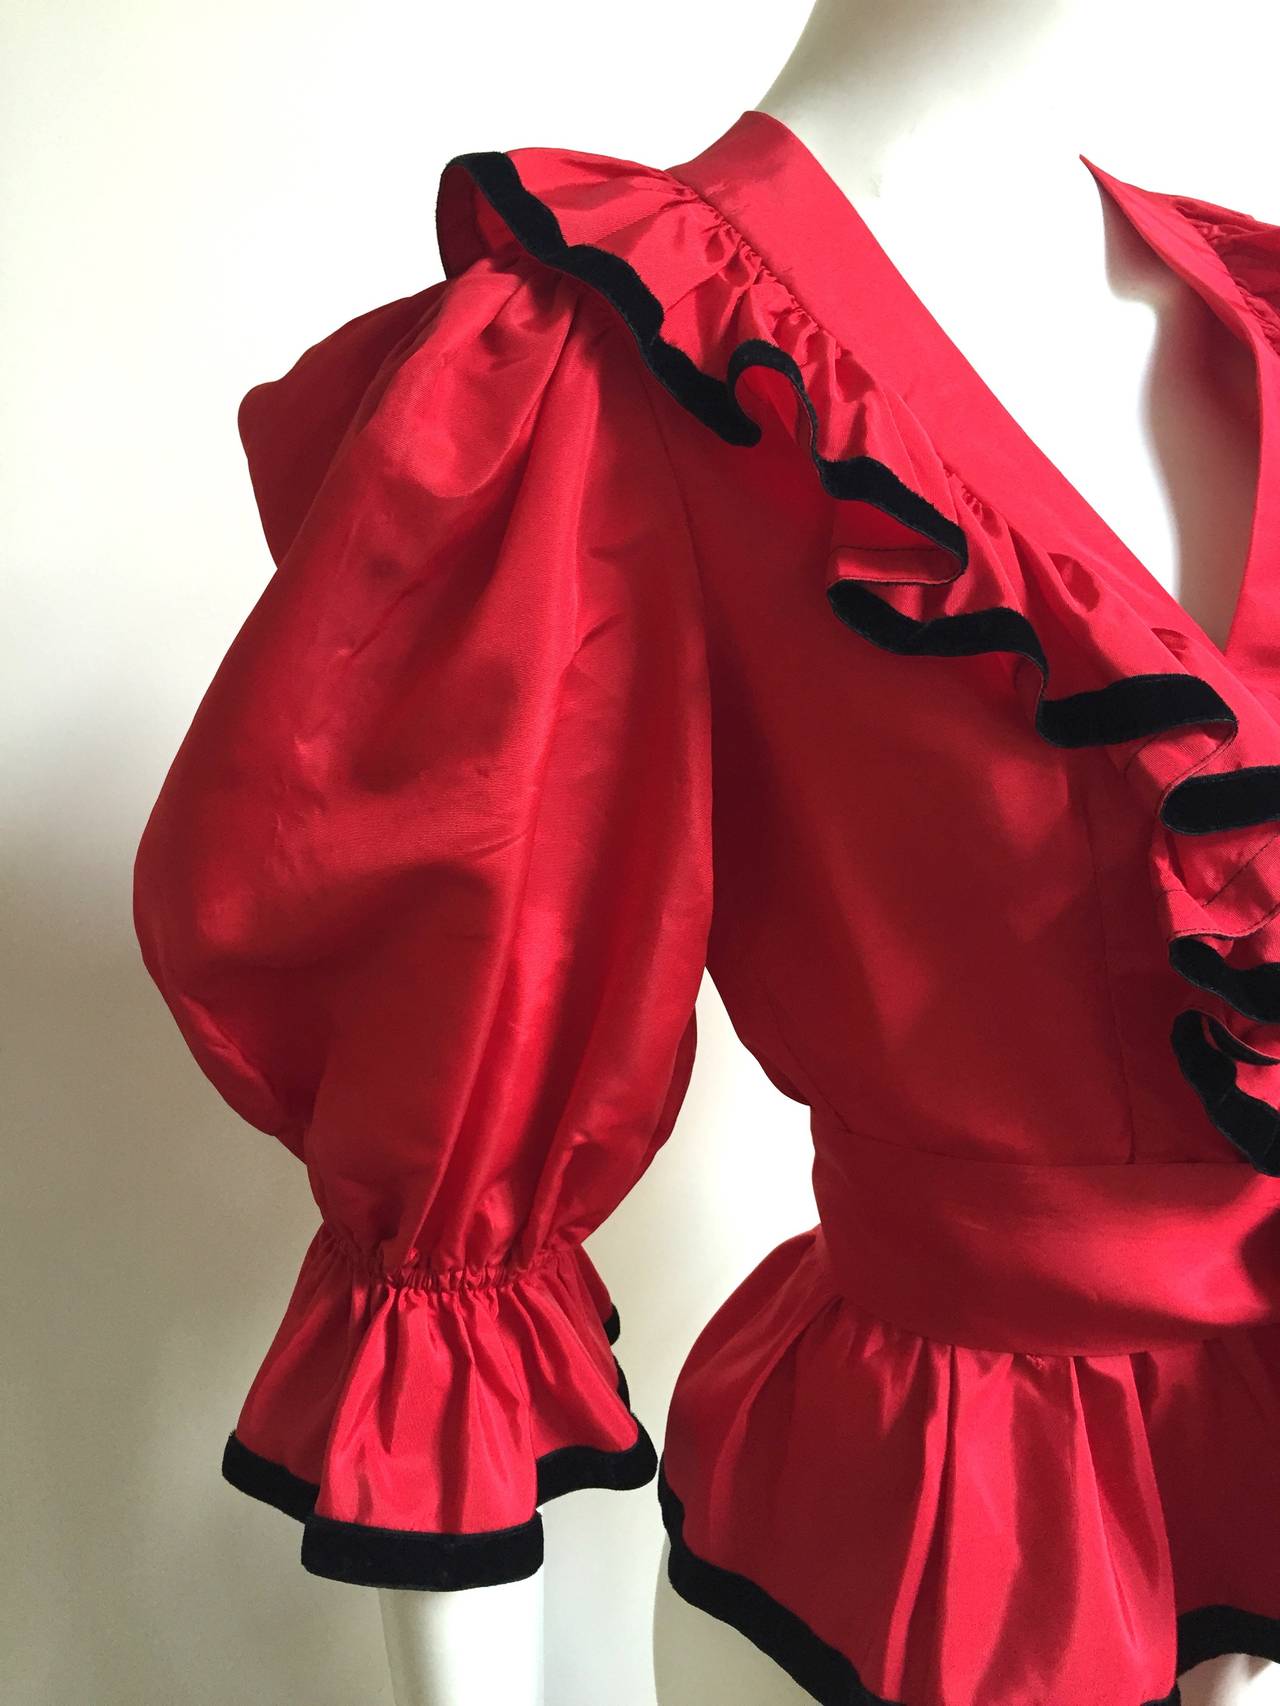 Albert Capraro 1970s red silk taffeta with black velvet trim and sash blouse size 4. Balloon sleeves and ruffled collar makes this blouse POP.
Measurements are:
32" bust
19" sleeves
15